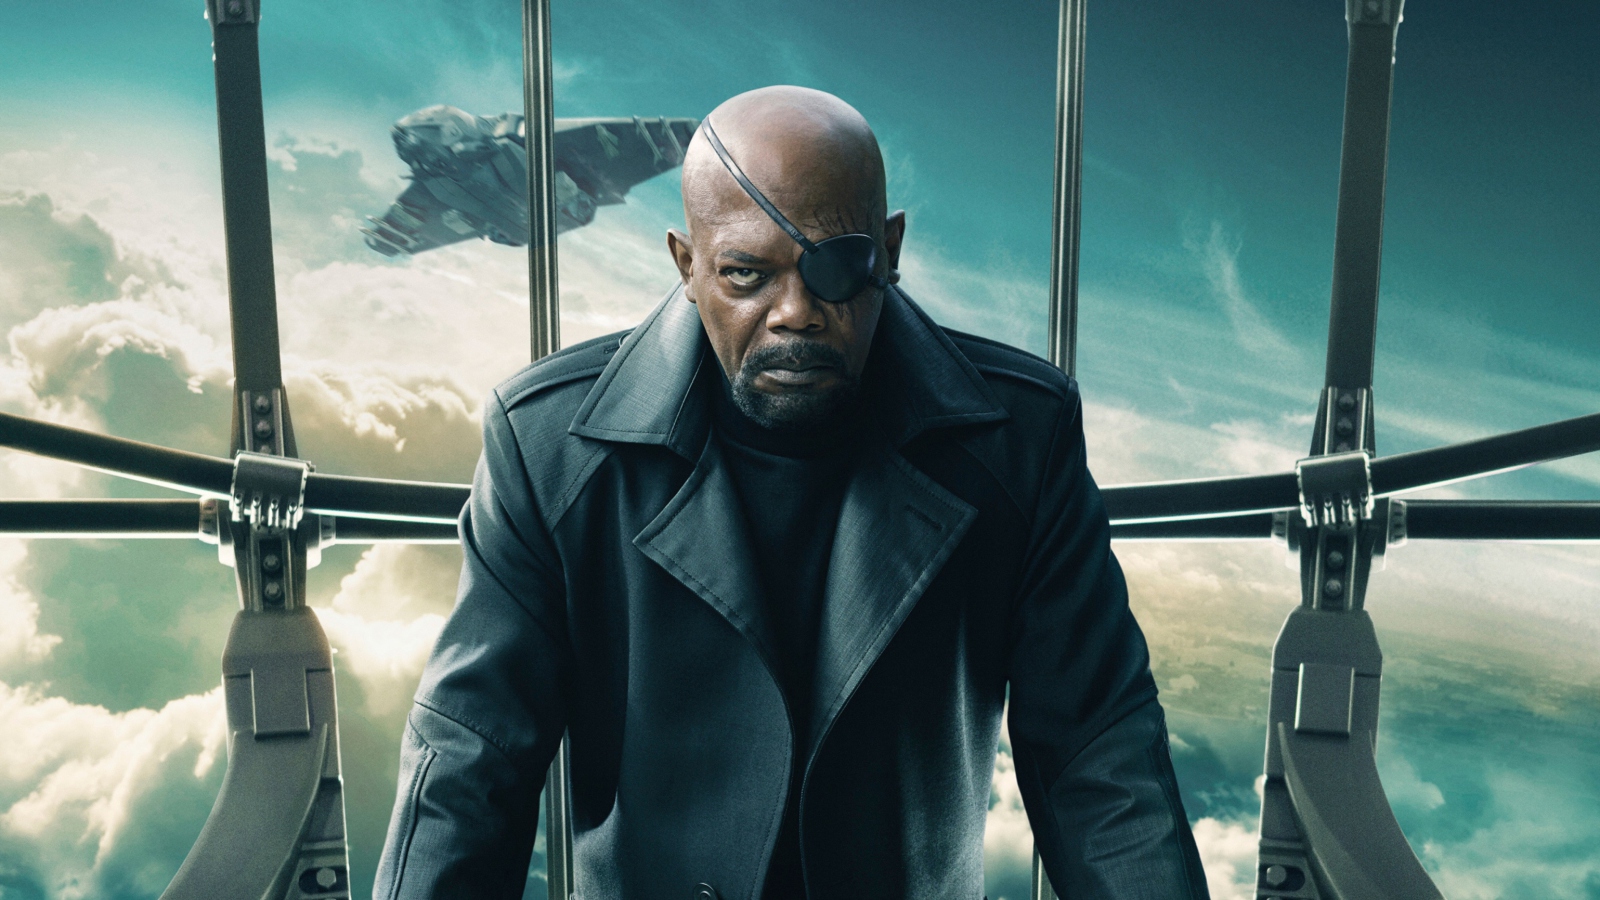 Nick Fury Captain America The Winter Soldier wallpaper 1600x900